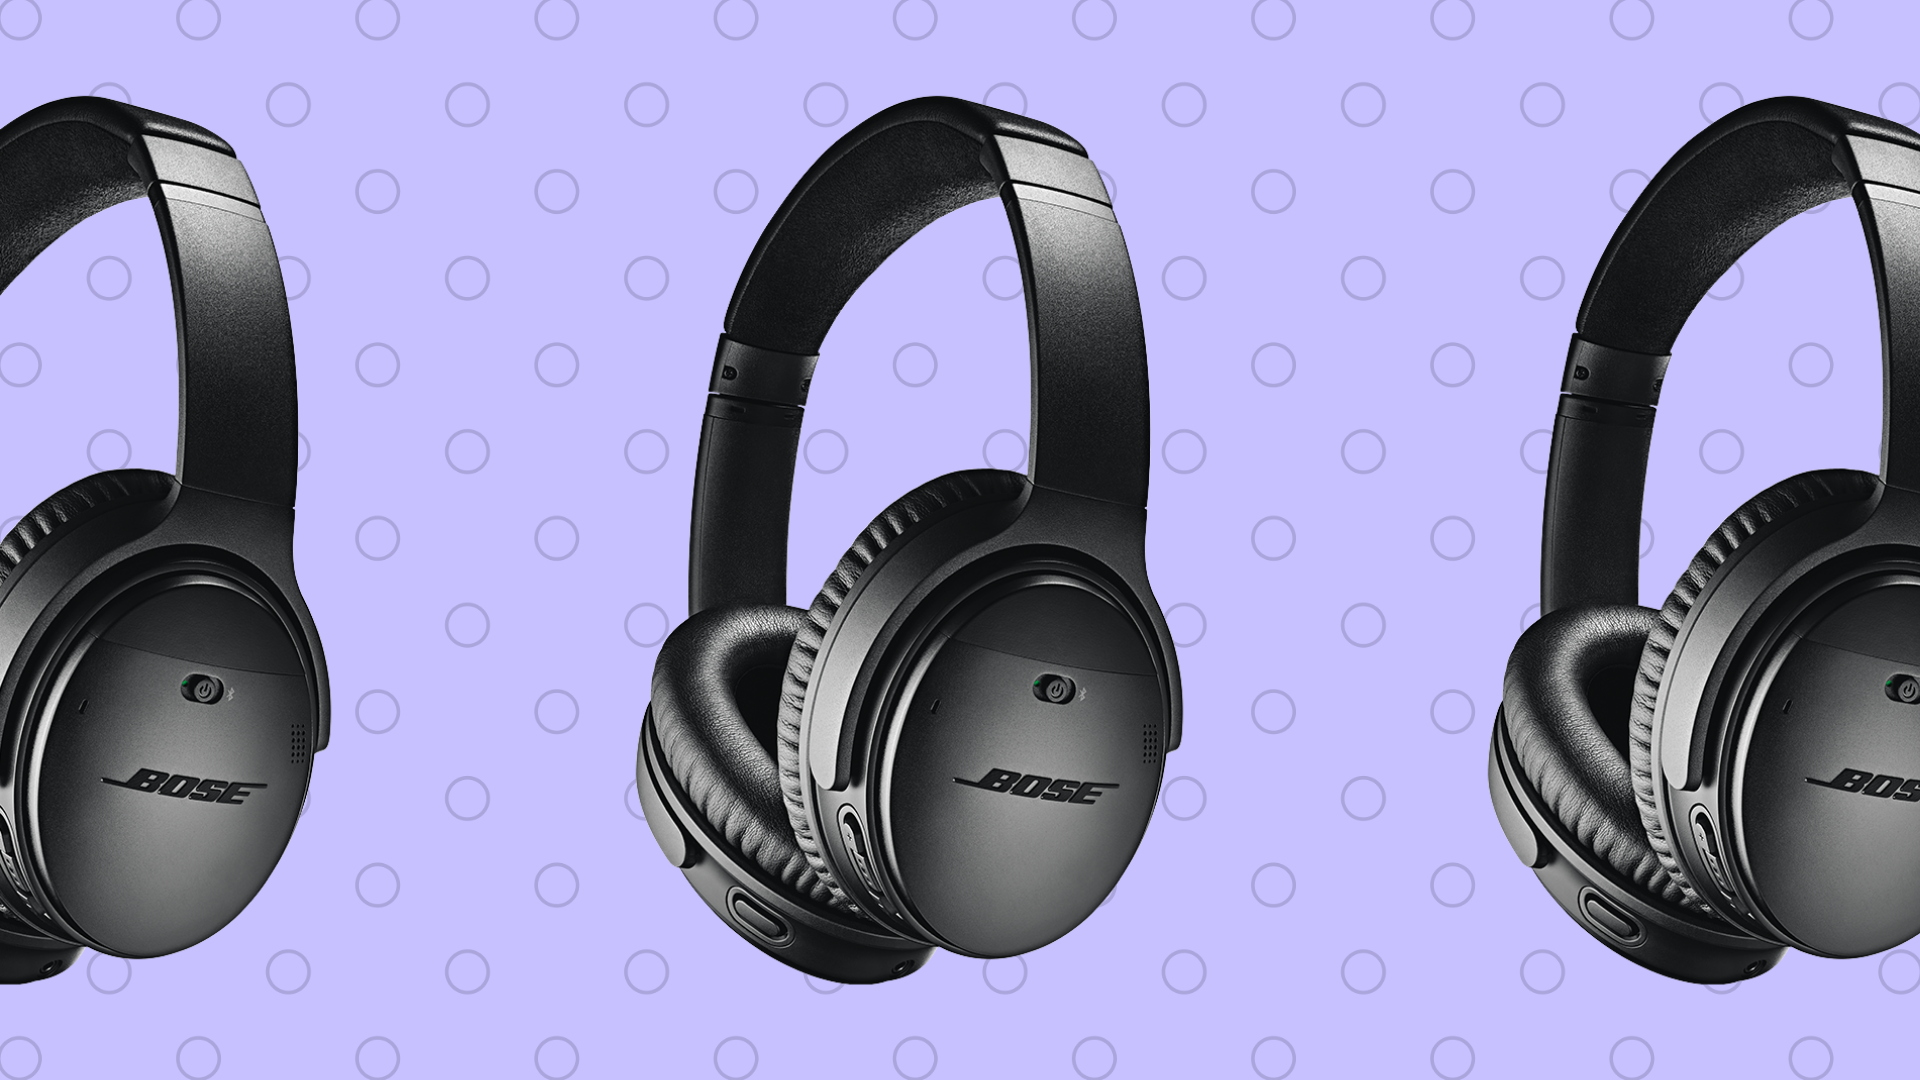 Best early Black Friday deals on headphones are happening right now at